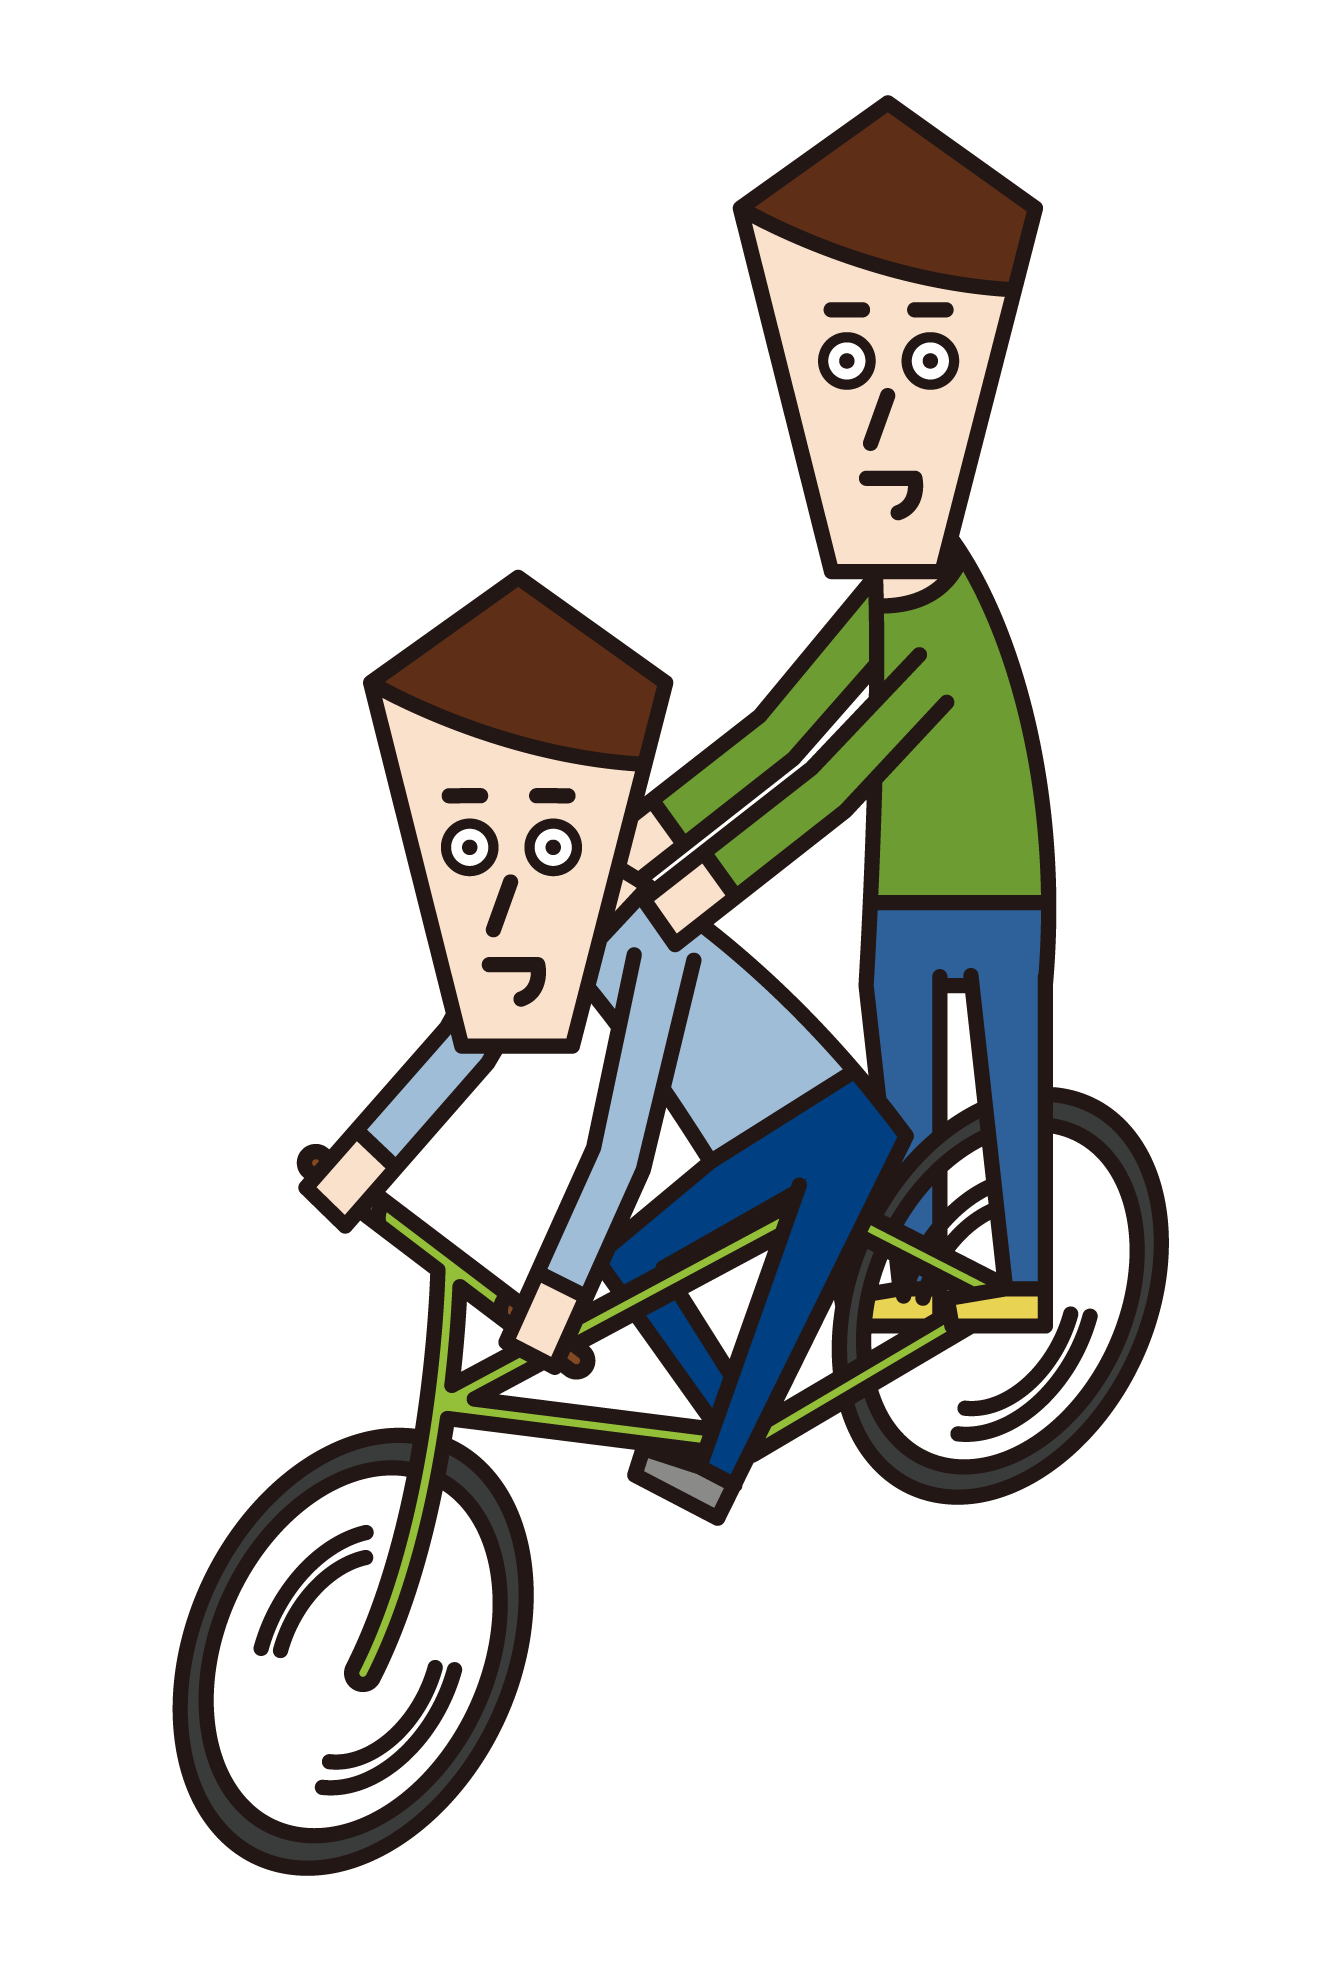 Illustration of two people (men) riding a bicycle